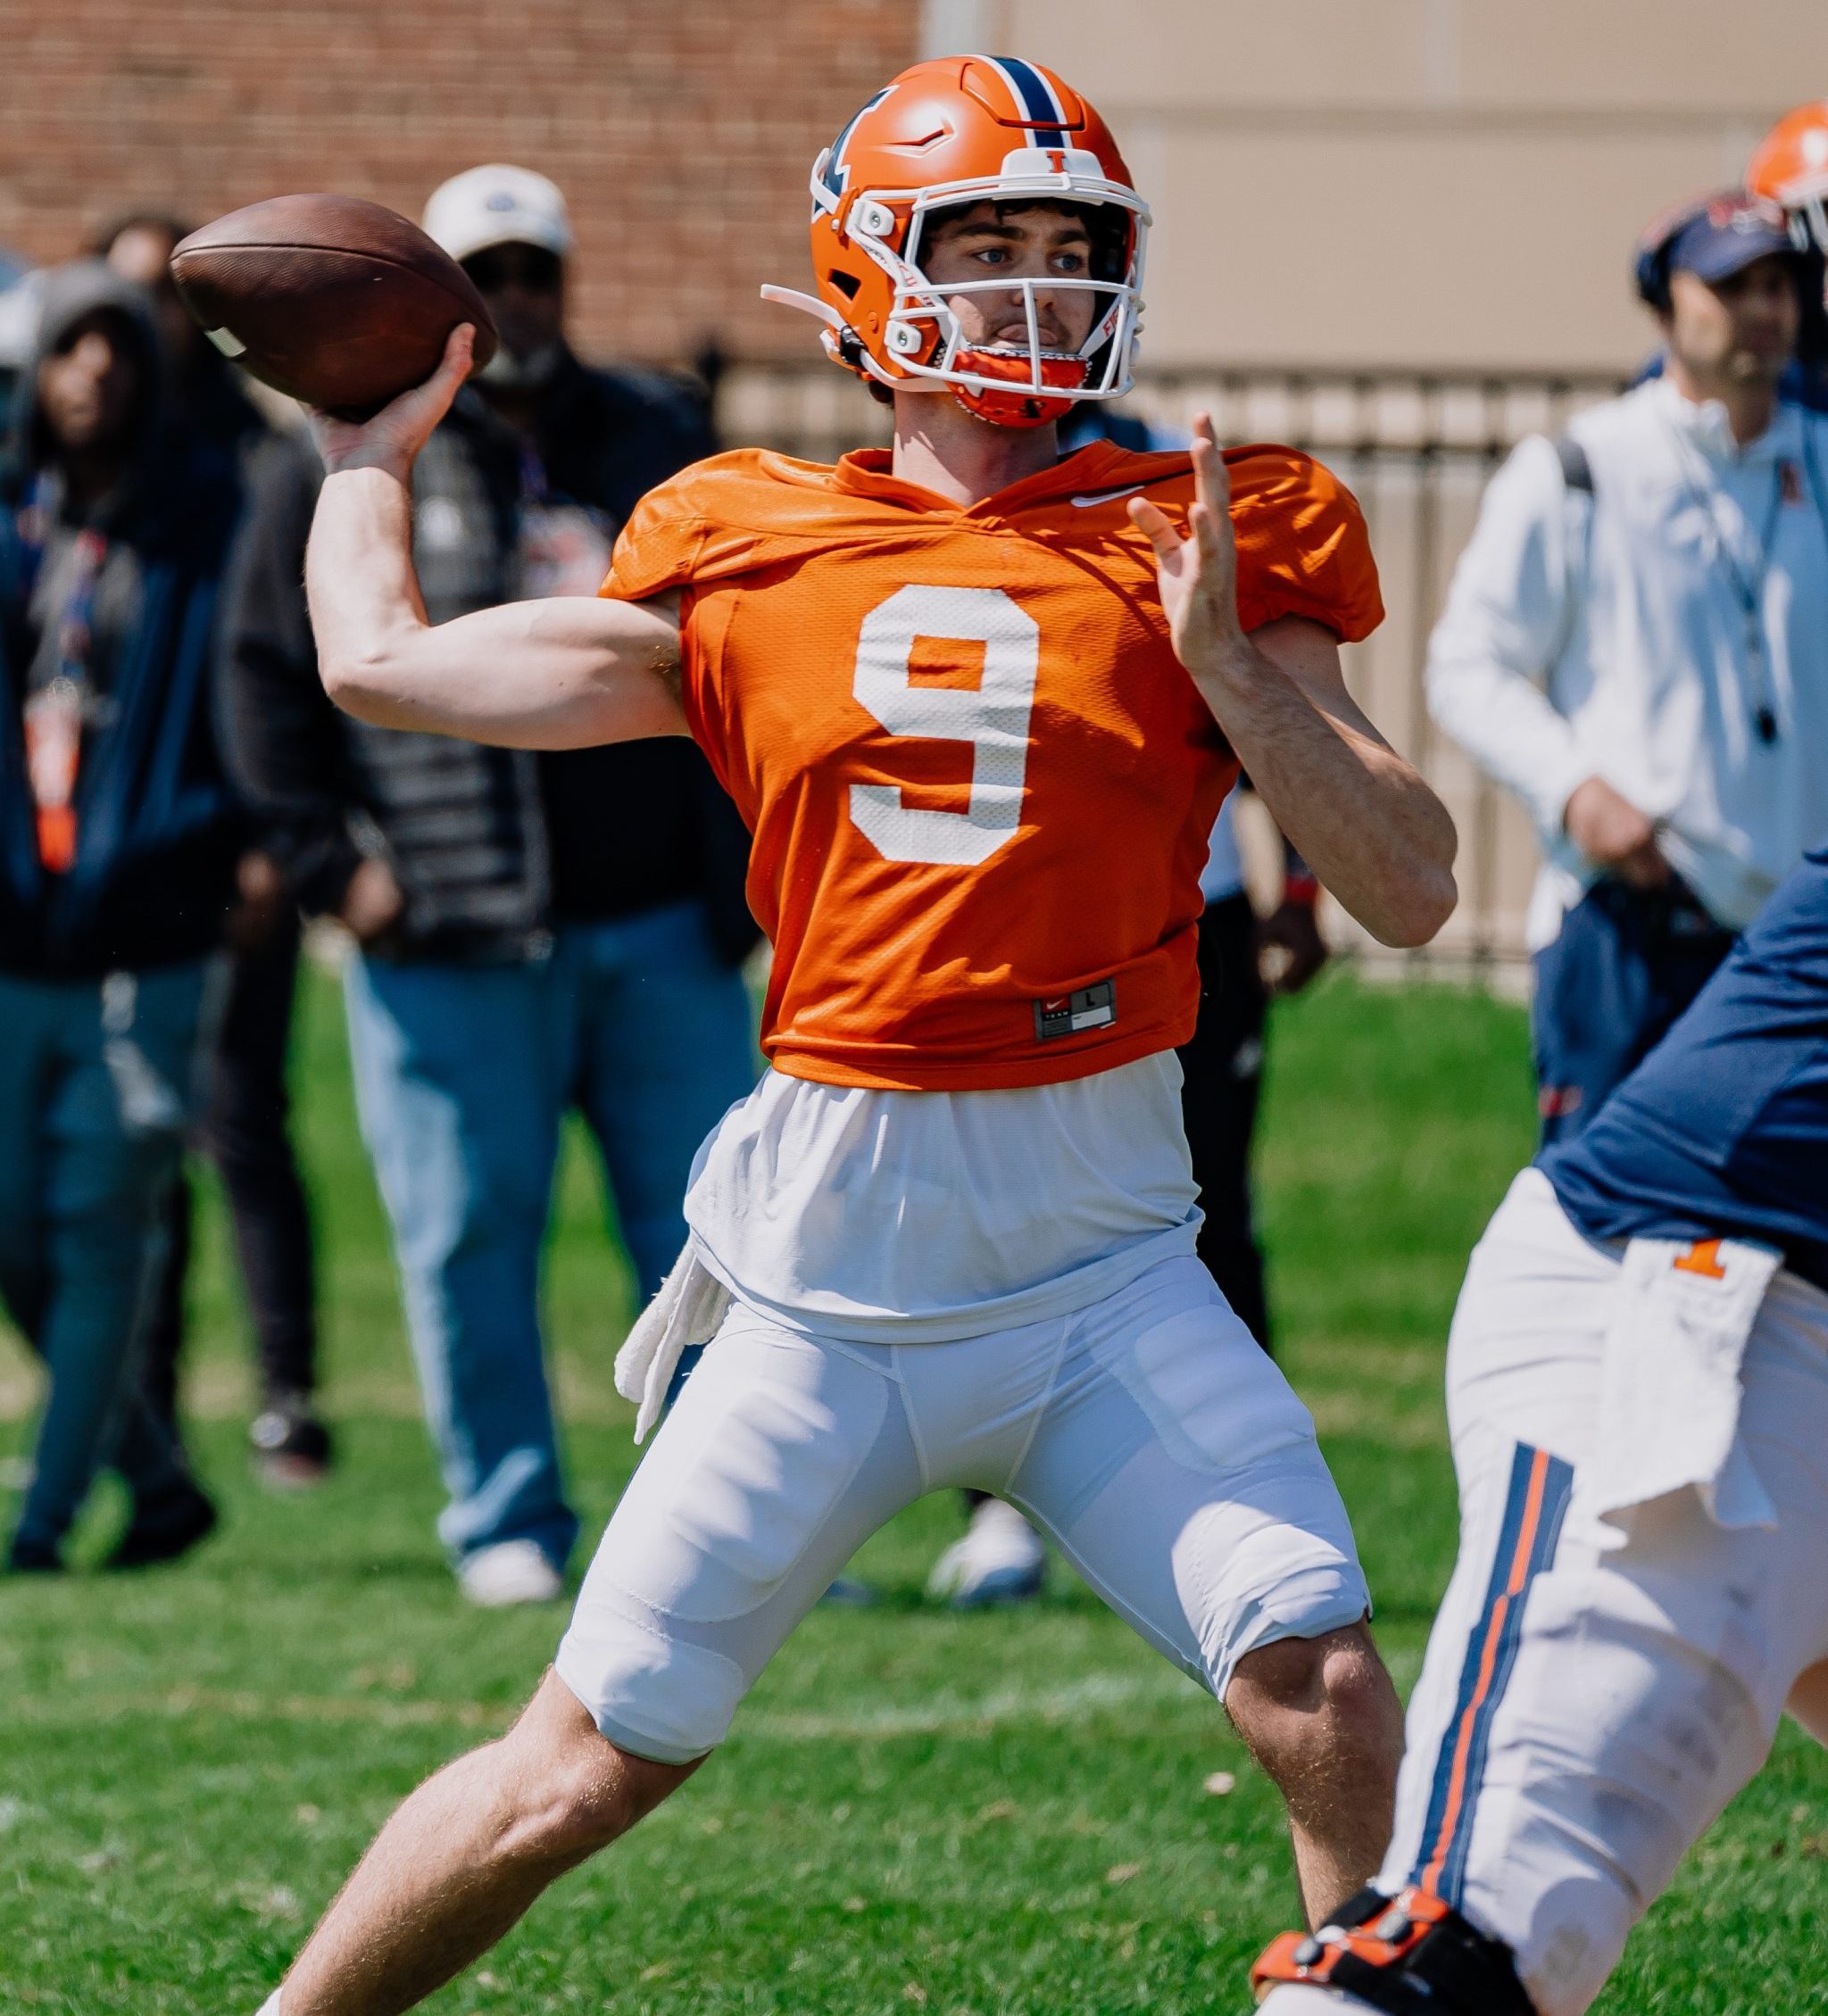 Illini’s Luke Altmyer Among 45 QBs Selected to Manning Passing Academy 